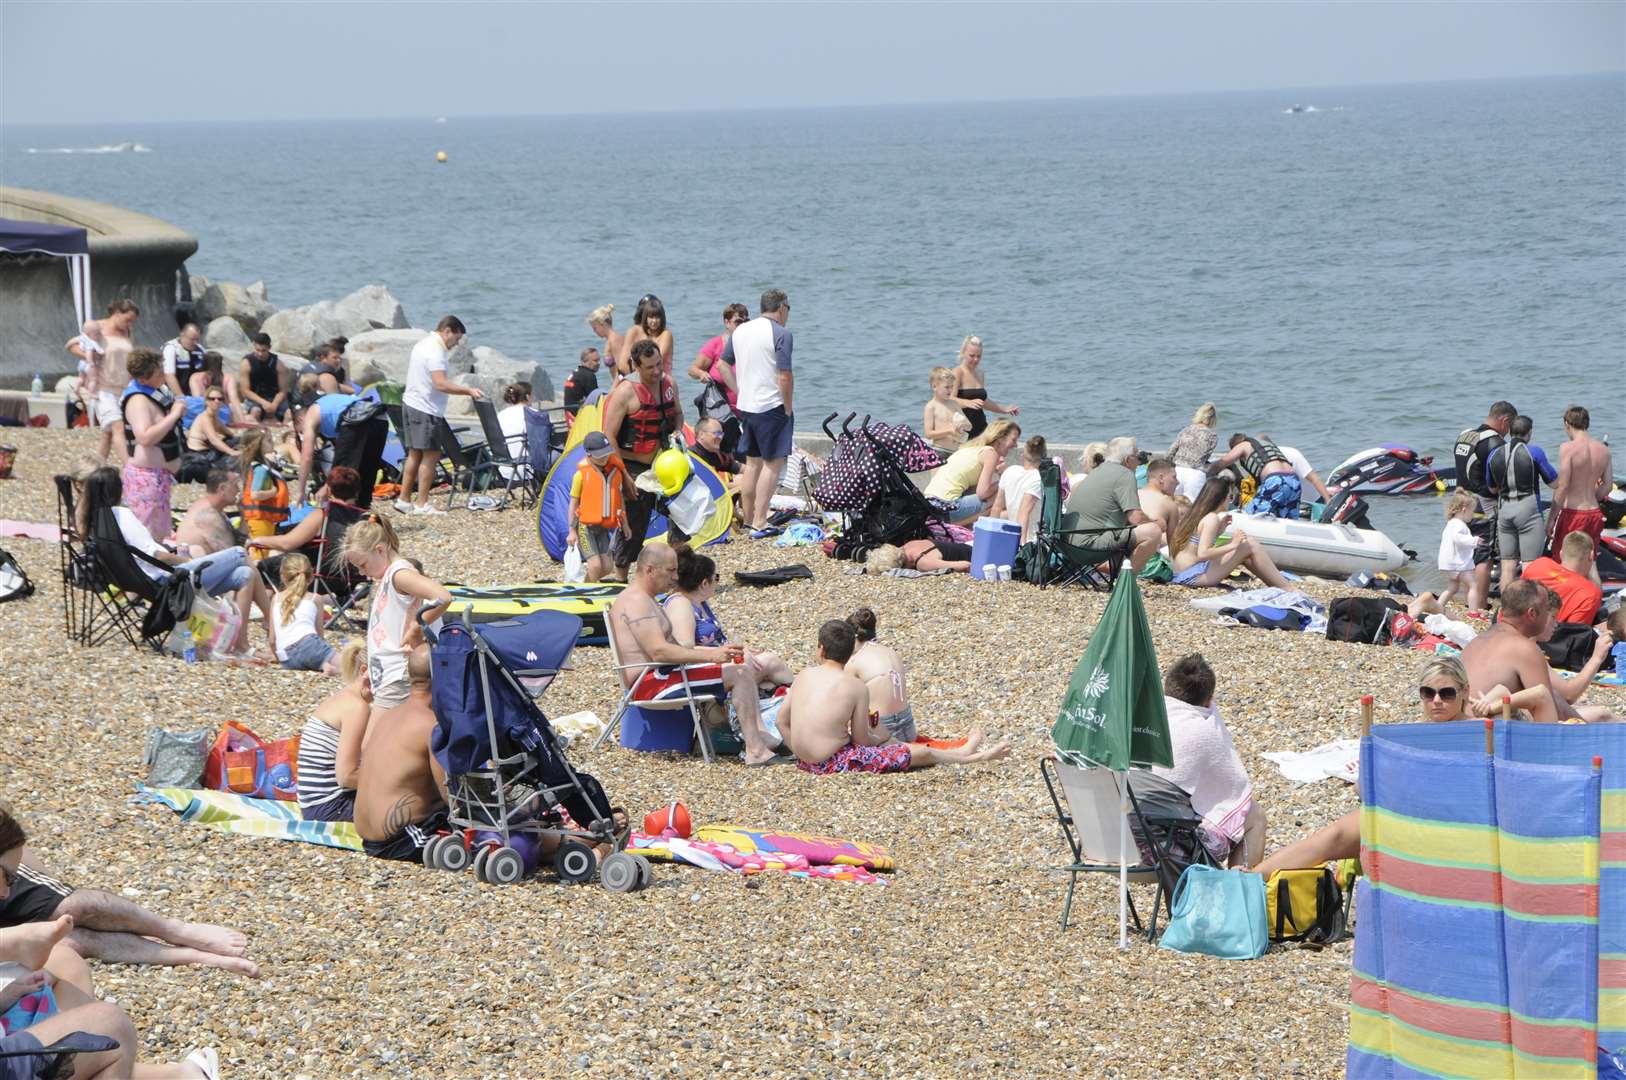 The beaches in Herne Bay are popular attractions